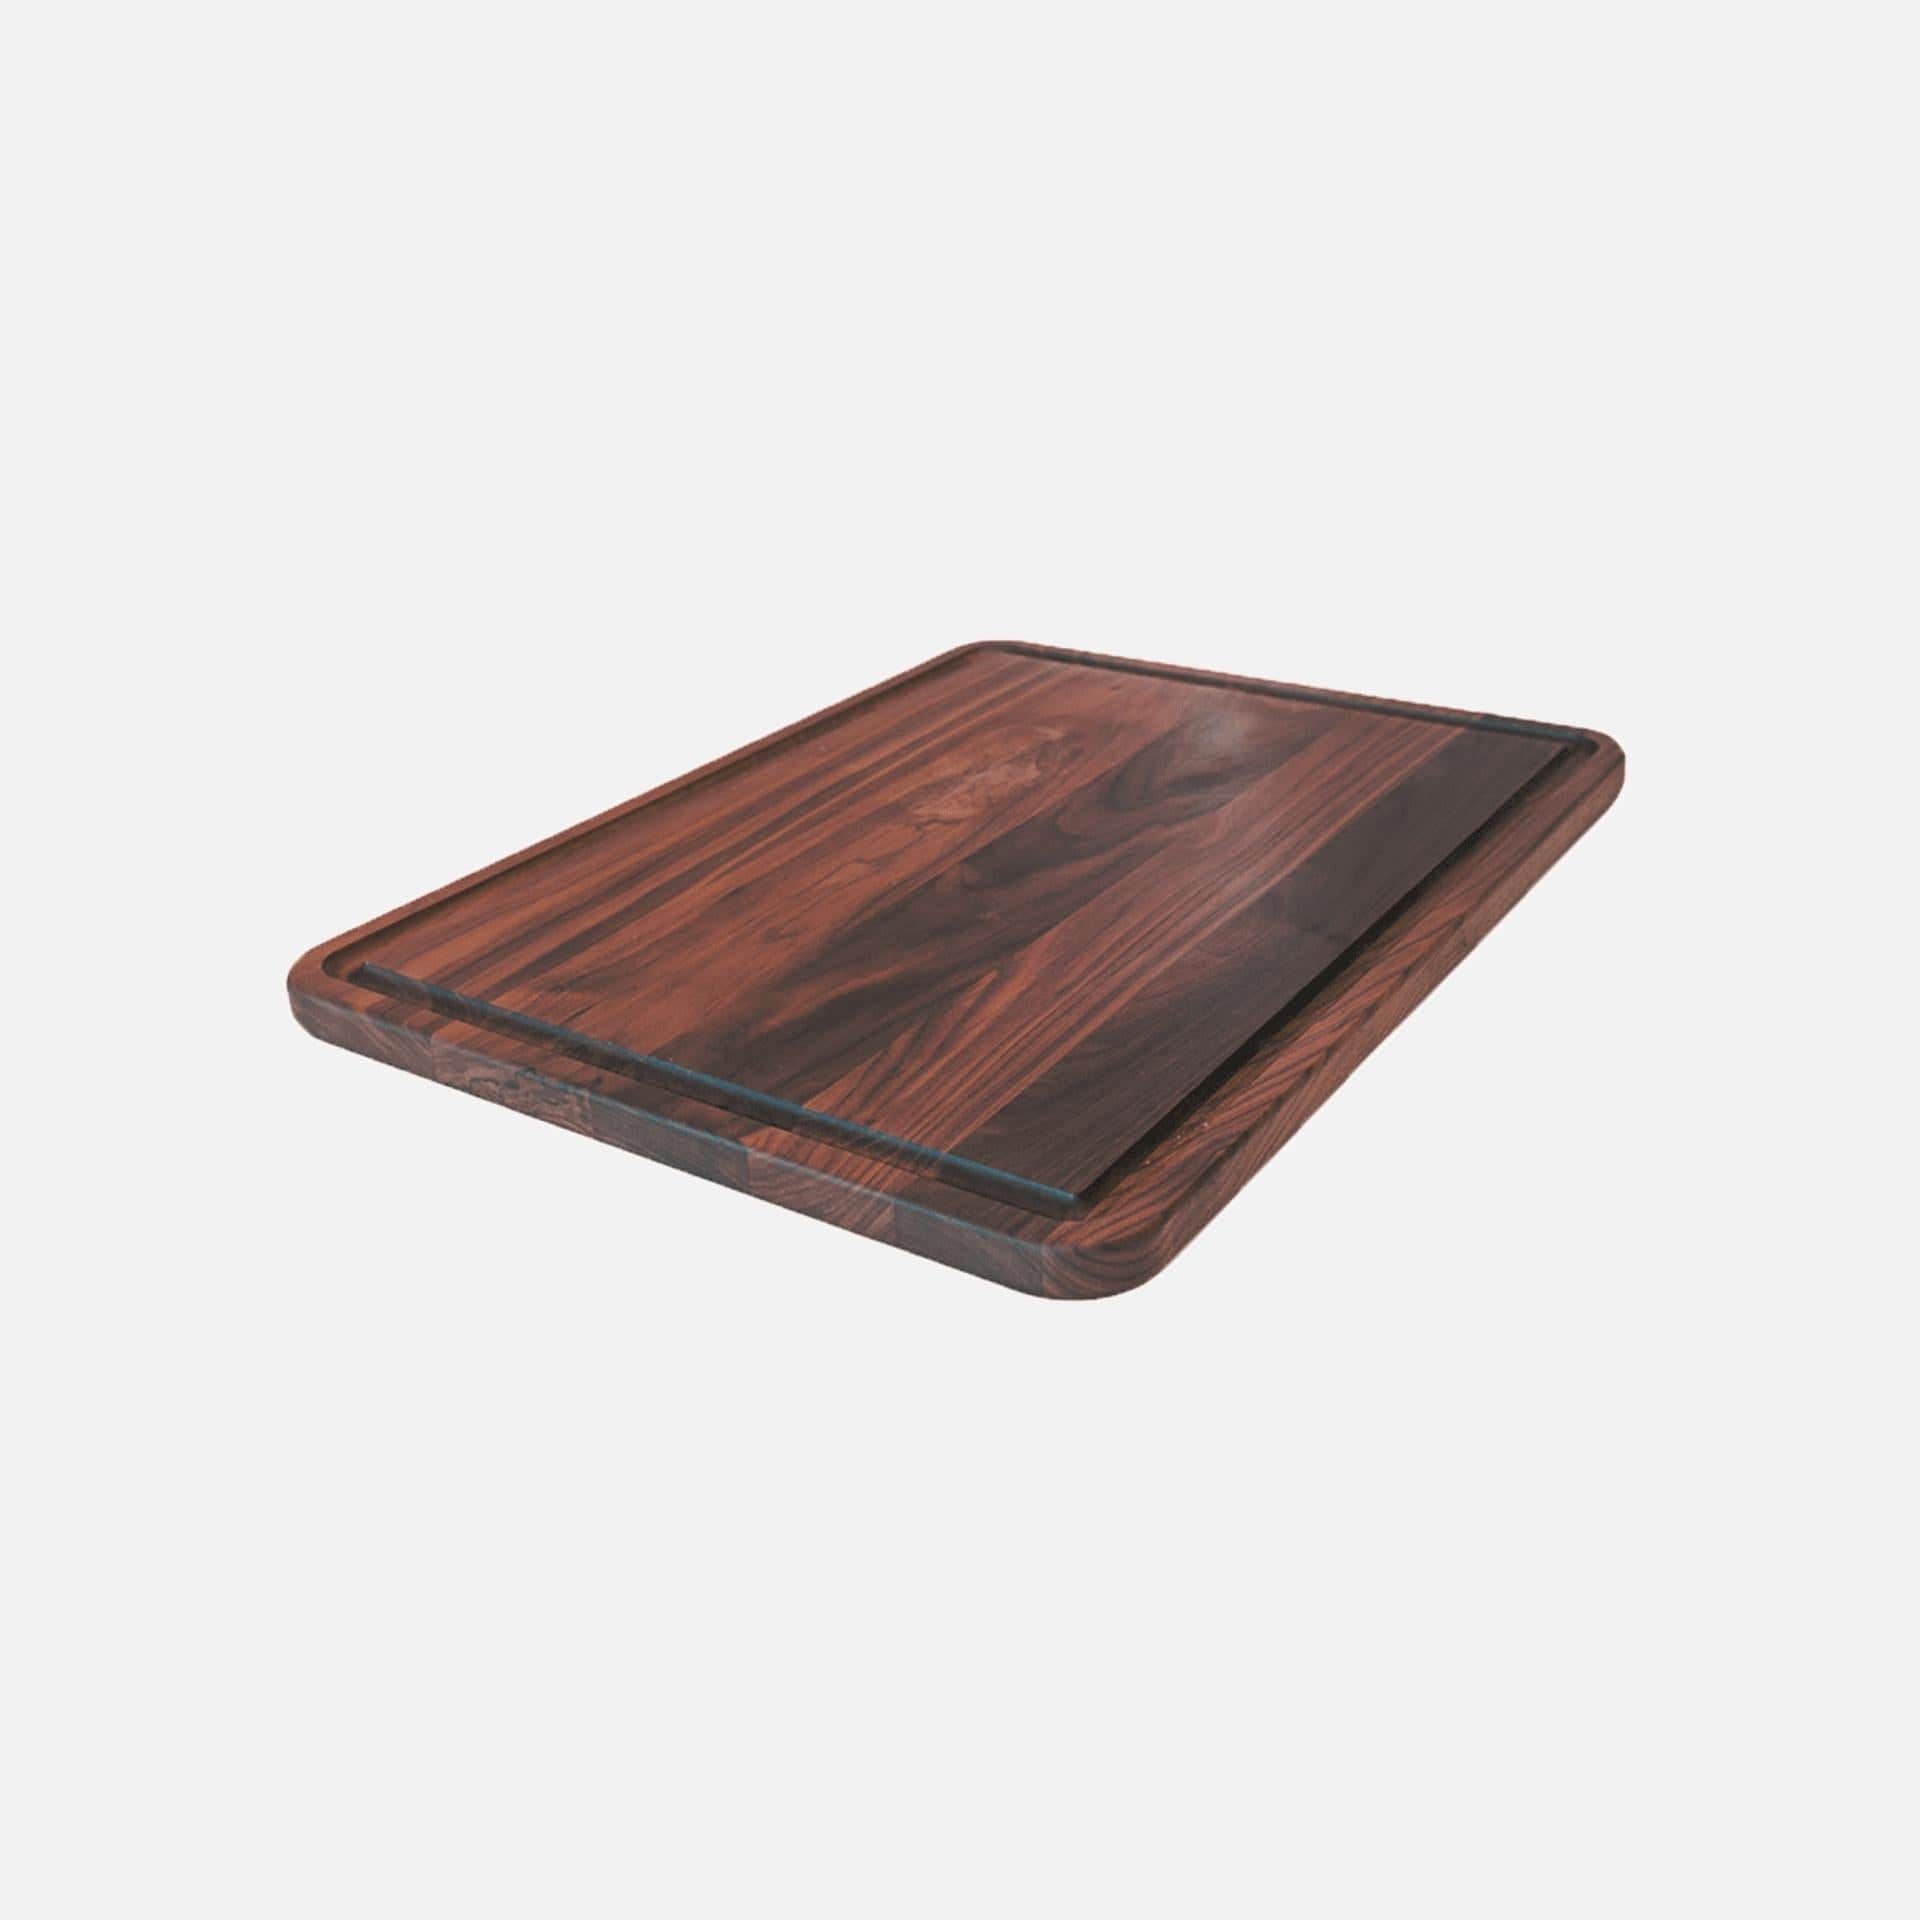 https://www.xspecial.co/cdn/shop/products/virginia-boys-kitchens-17x11-in-large-walnut-cutting-board-with-juice-drip-groove-made-in-usa-medium-11-x-17-walnut-board-reversible-with-juice-groove-cutting-board-made-in-usa-from-s_4e6e9b62-182a-4c34-9e75-1b7a665a88aa.jpg?v=1679355879